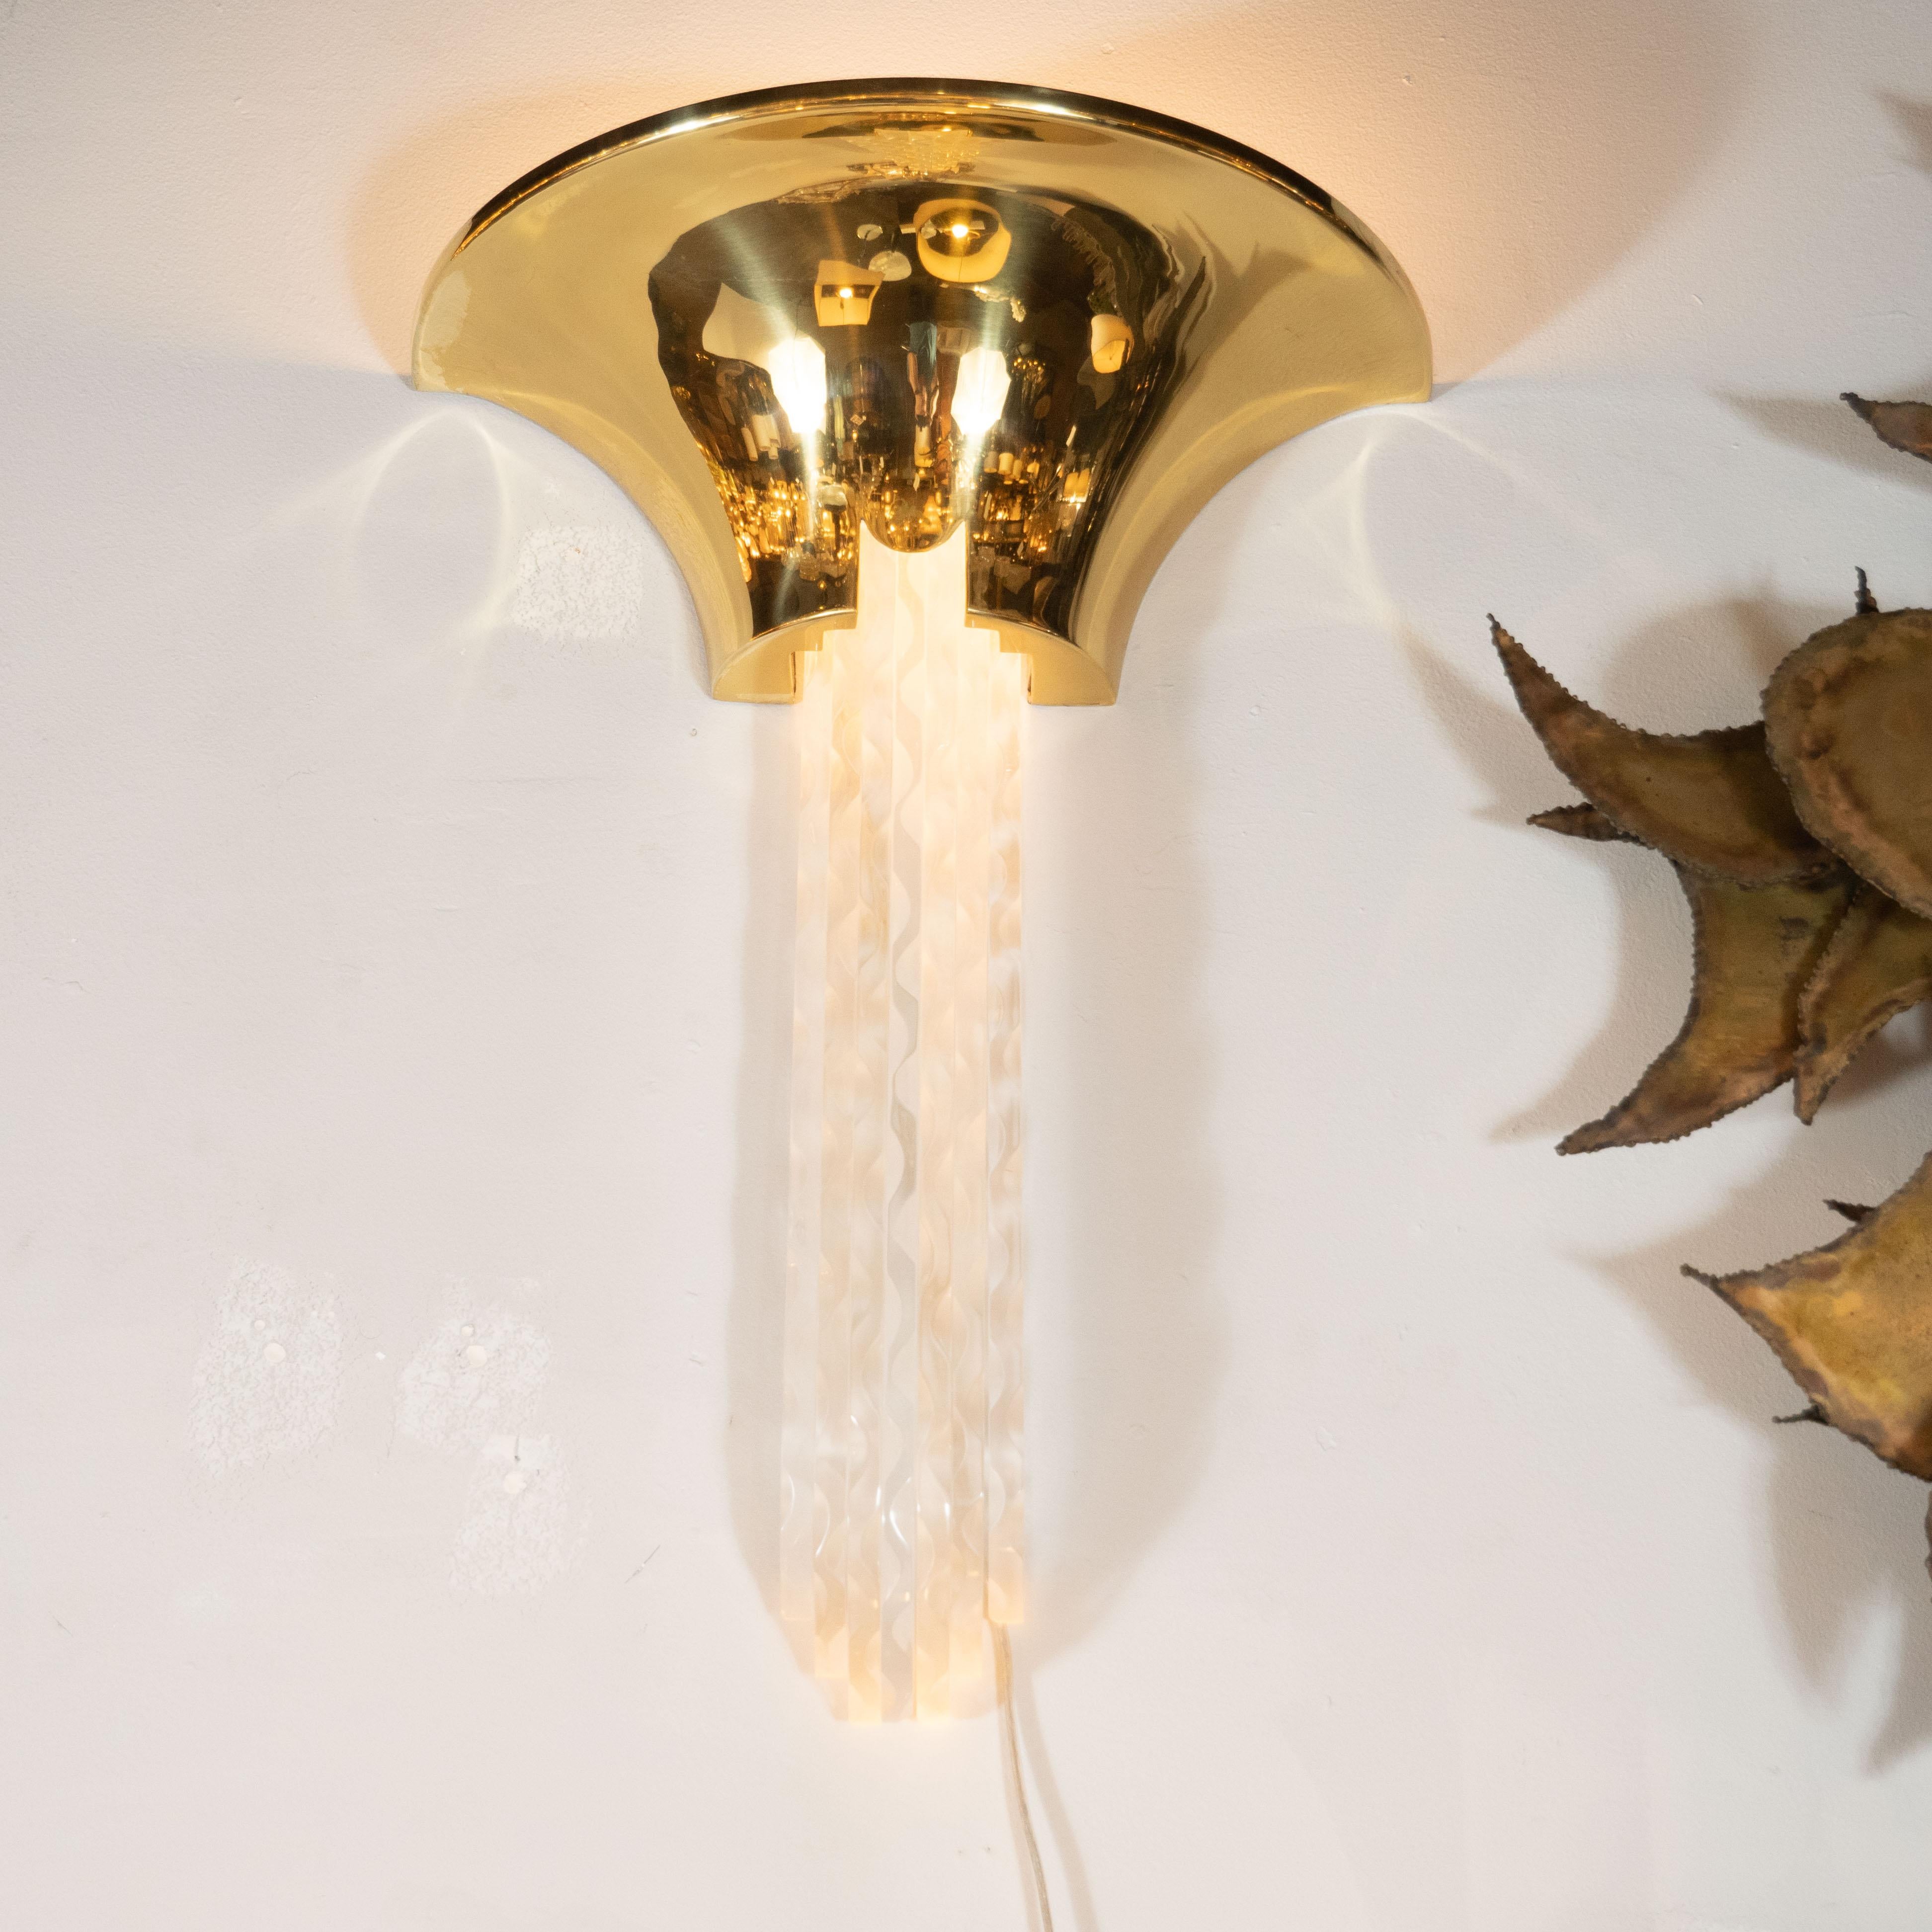 These iconic and dramatic sconces were designed by Karl Springer- one of the most important and influential designers of the 20th century- in America circa 1970. They feature demilune tops with bowed sides. Streamlined and illuminated Lucite